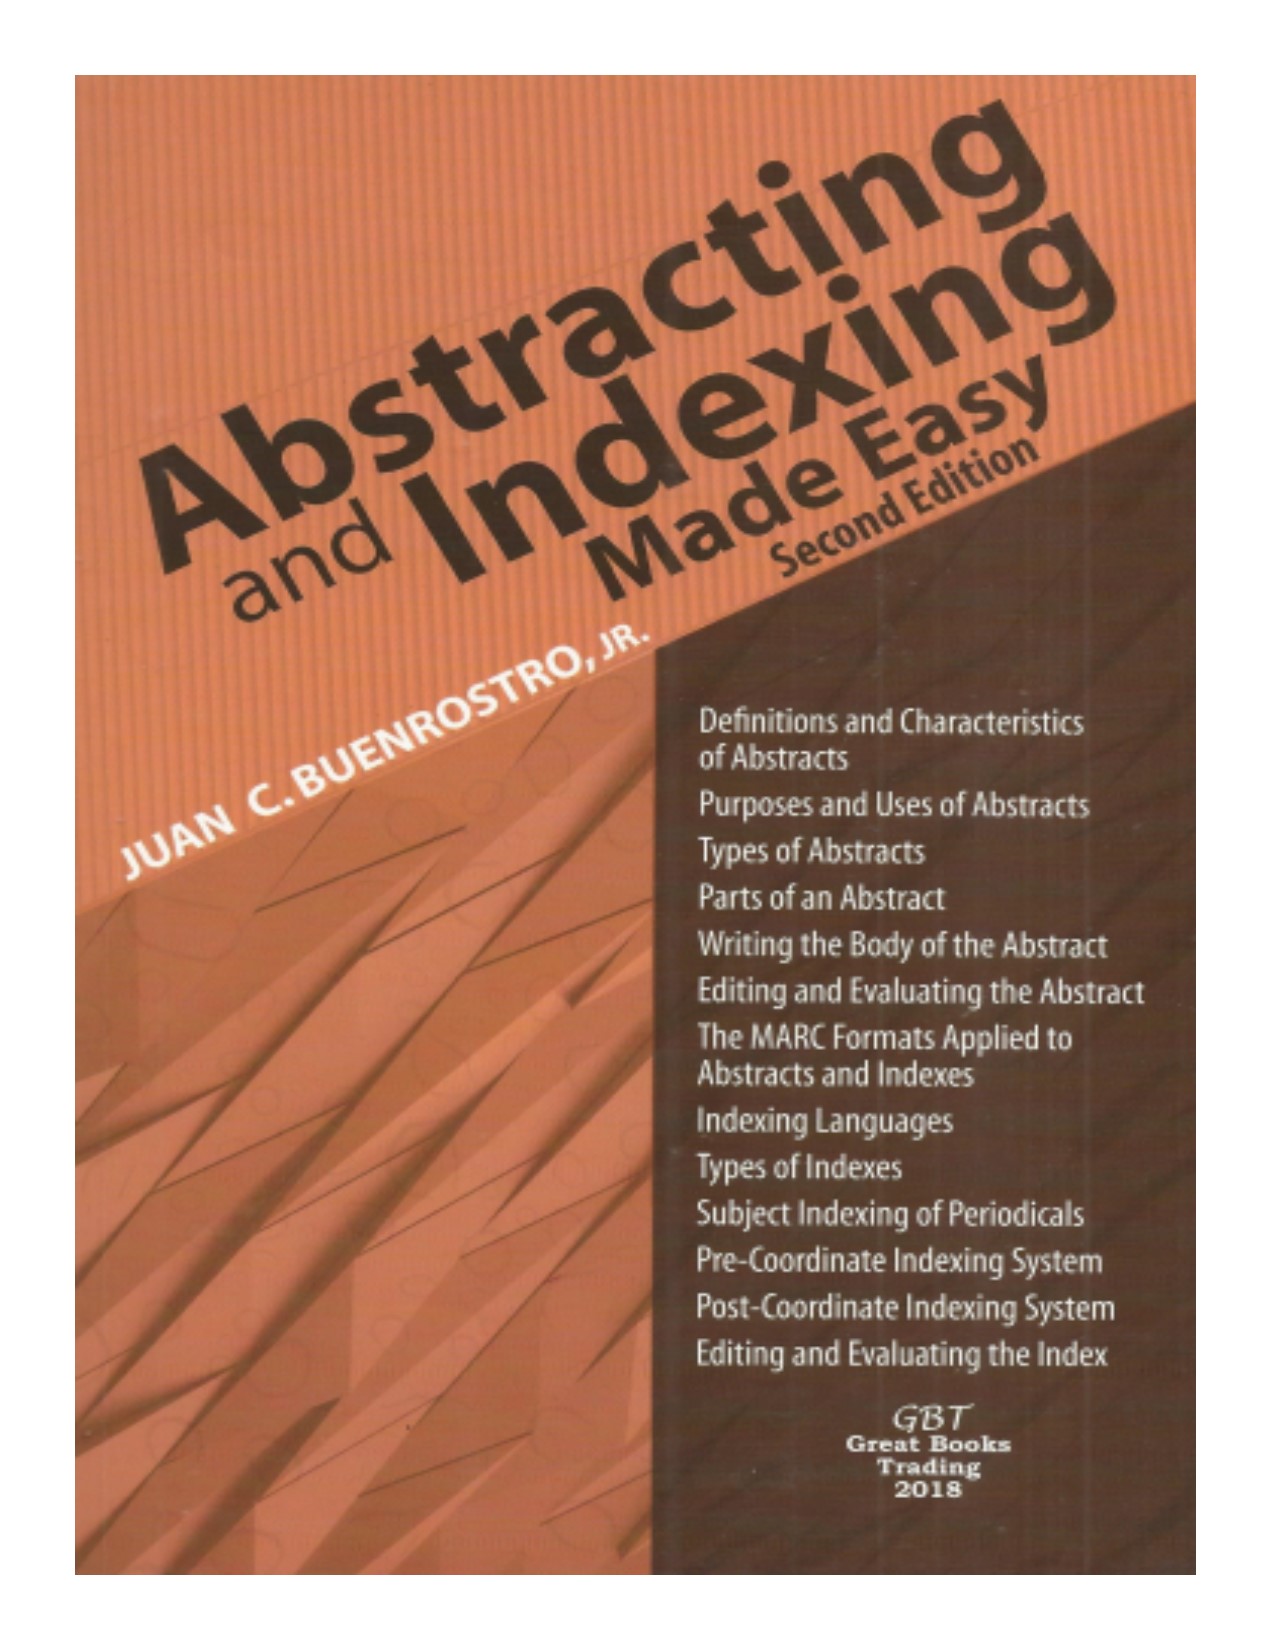 Abstracting and indexing made easy